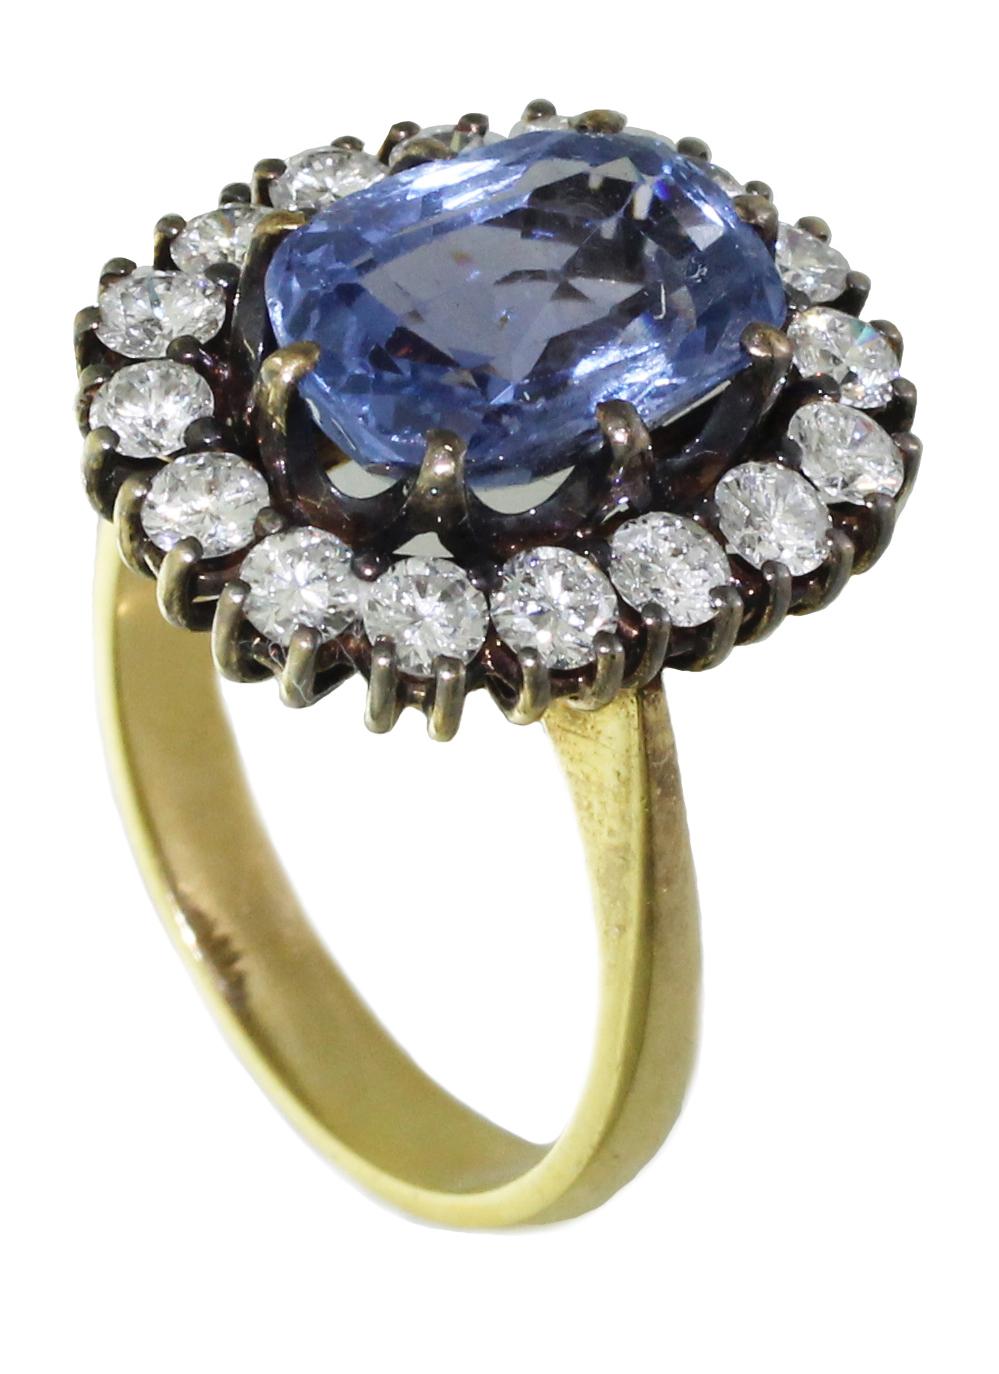 This precious cluster style ring features a 5 carat oval blue Ceylon Sapphire flanked by sixteen diamonds set in 18 yellow gold. Set to center with a single cushion shape old cut natural un enhanced Ceylon sapphire in an open back claw setting with